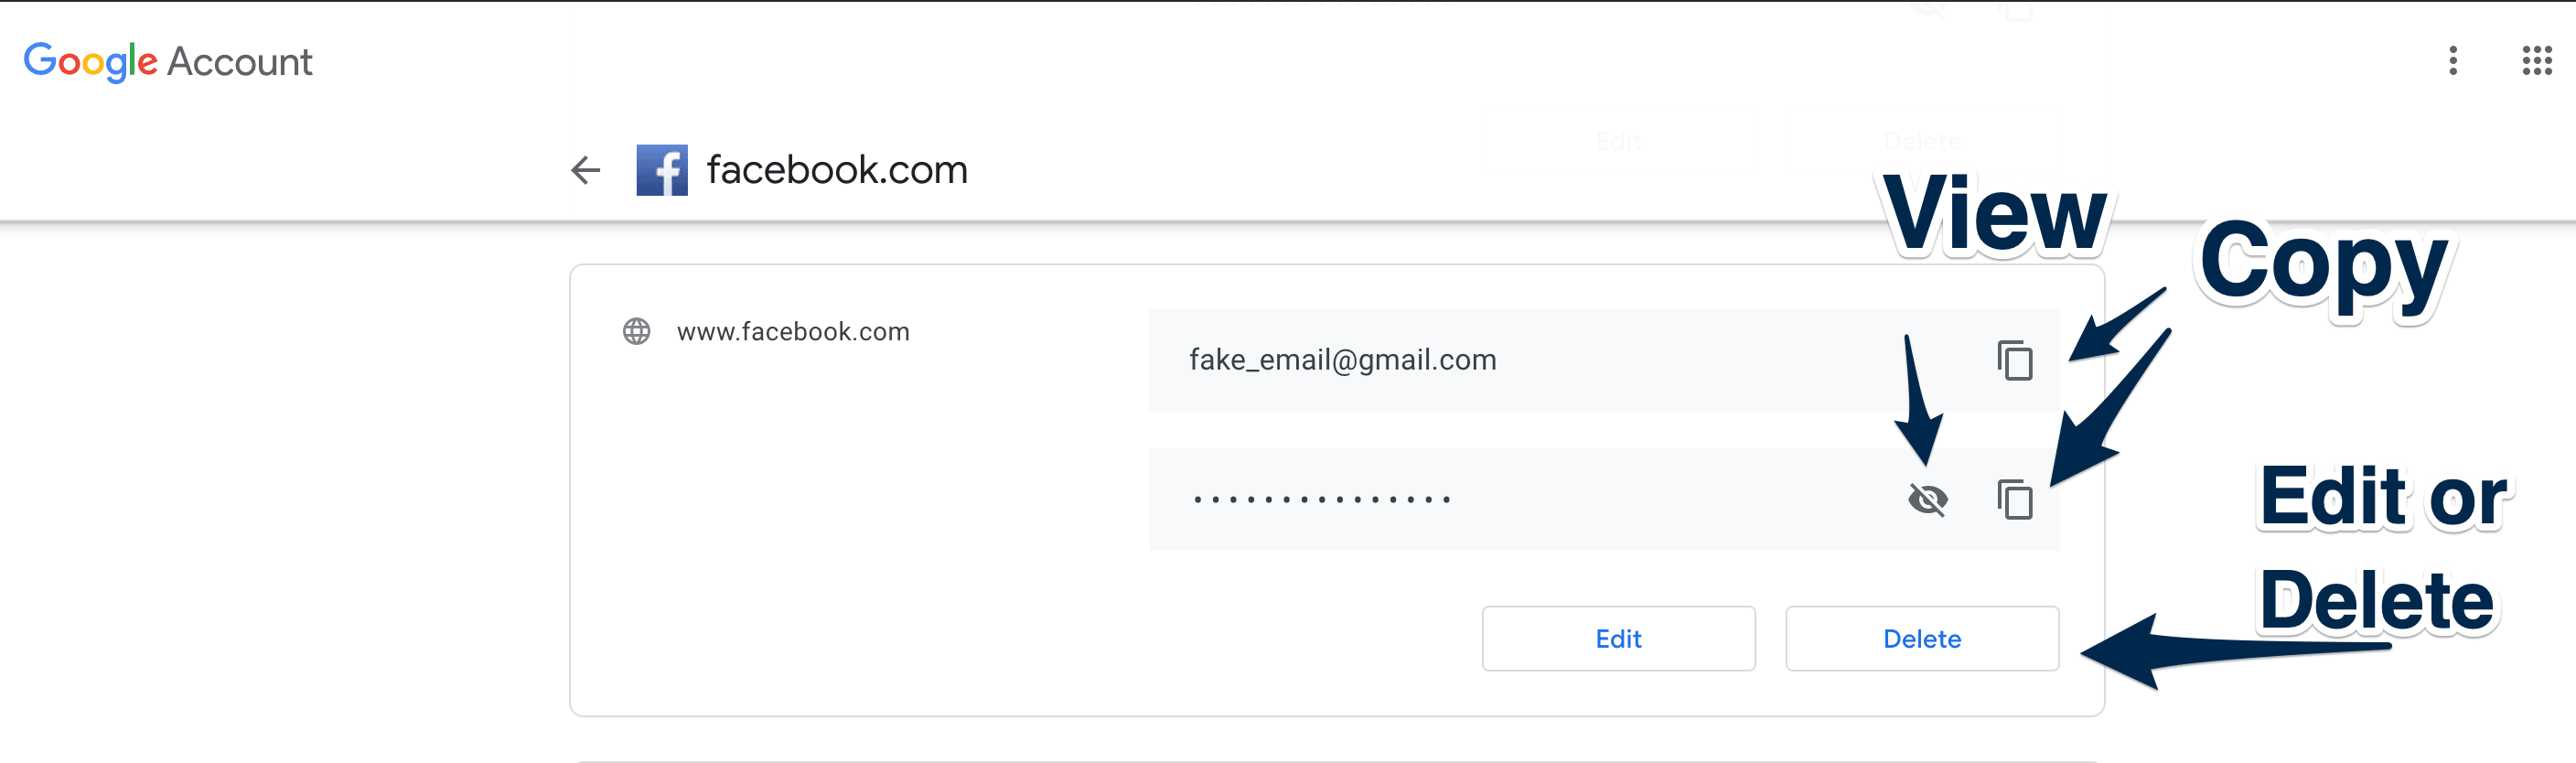 View of the Google account page under the newly created facebook login. One arrow points to the hide/show password icon, two other arrows points to the copy text icon, and the third arrow points to the Edit and Delete buttons